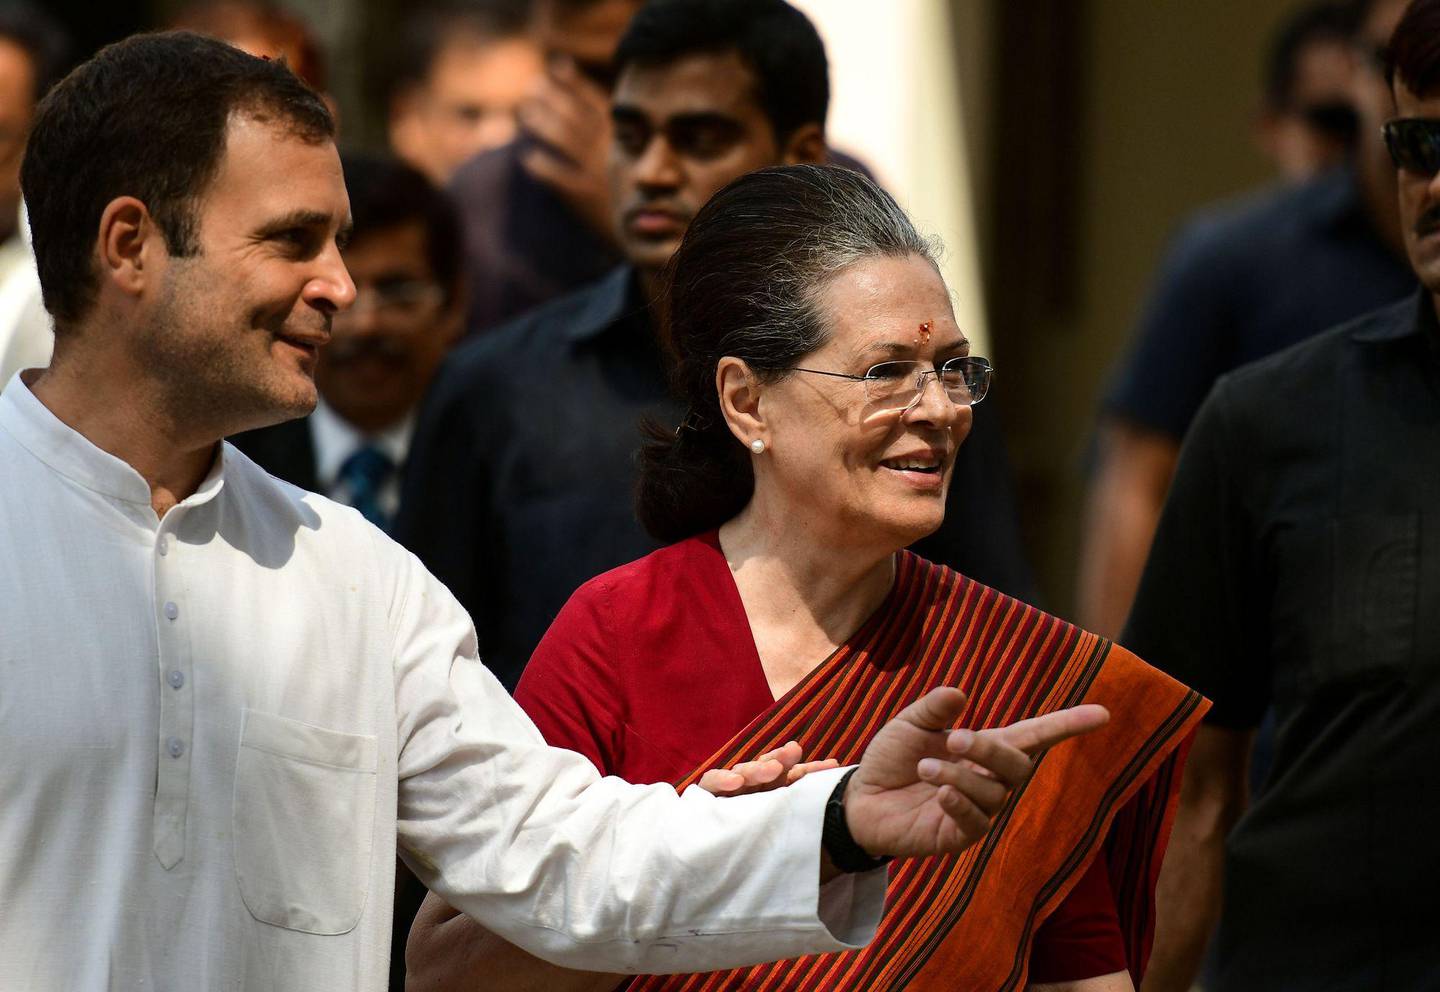 Indian Congress party senior leader Sonia Gandhi (R), along with her son, Indian National Congress party president Rahul Gandhi (L), leaves after filing her nomination papers for the forthcoming general election at a district court in Rae Bareilly on April 11, 2019. - India's gargantuan election, the biggest in history, kicked off on April 11 with Prime Minister Narendra Modi seeking a second term from the South Asian behemoth's 900 million voters. (Photo by SANJAY KANOJIA / AFP)